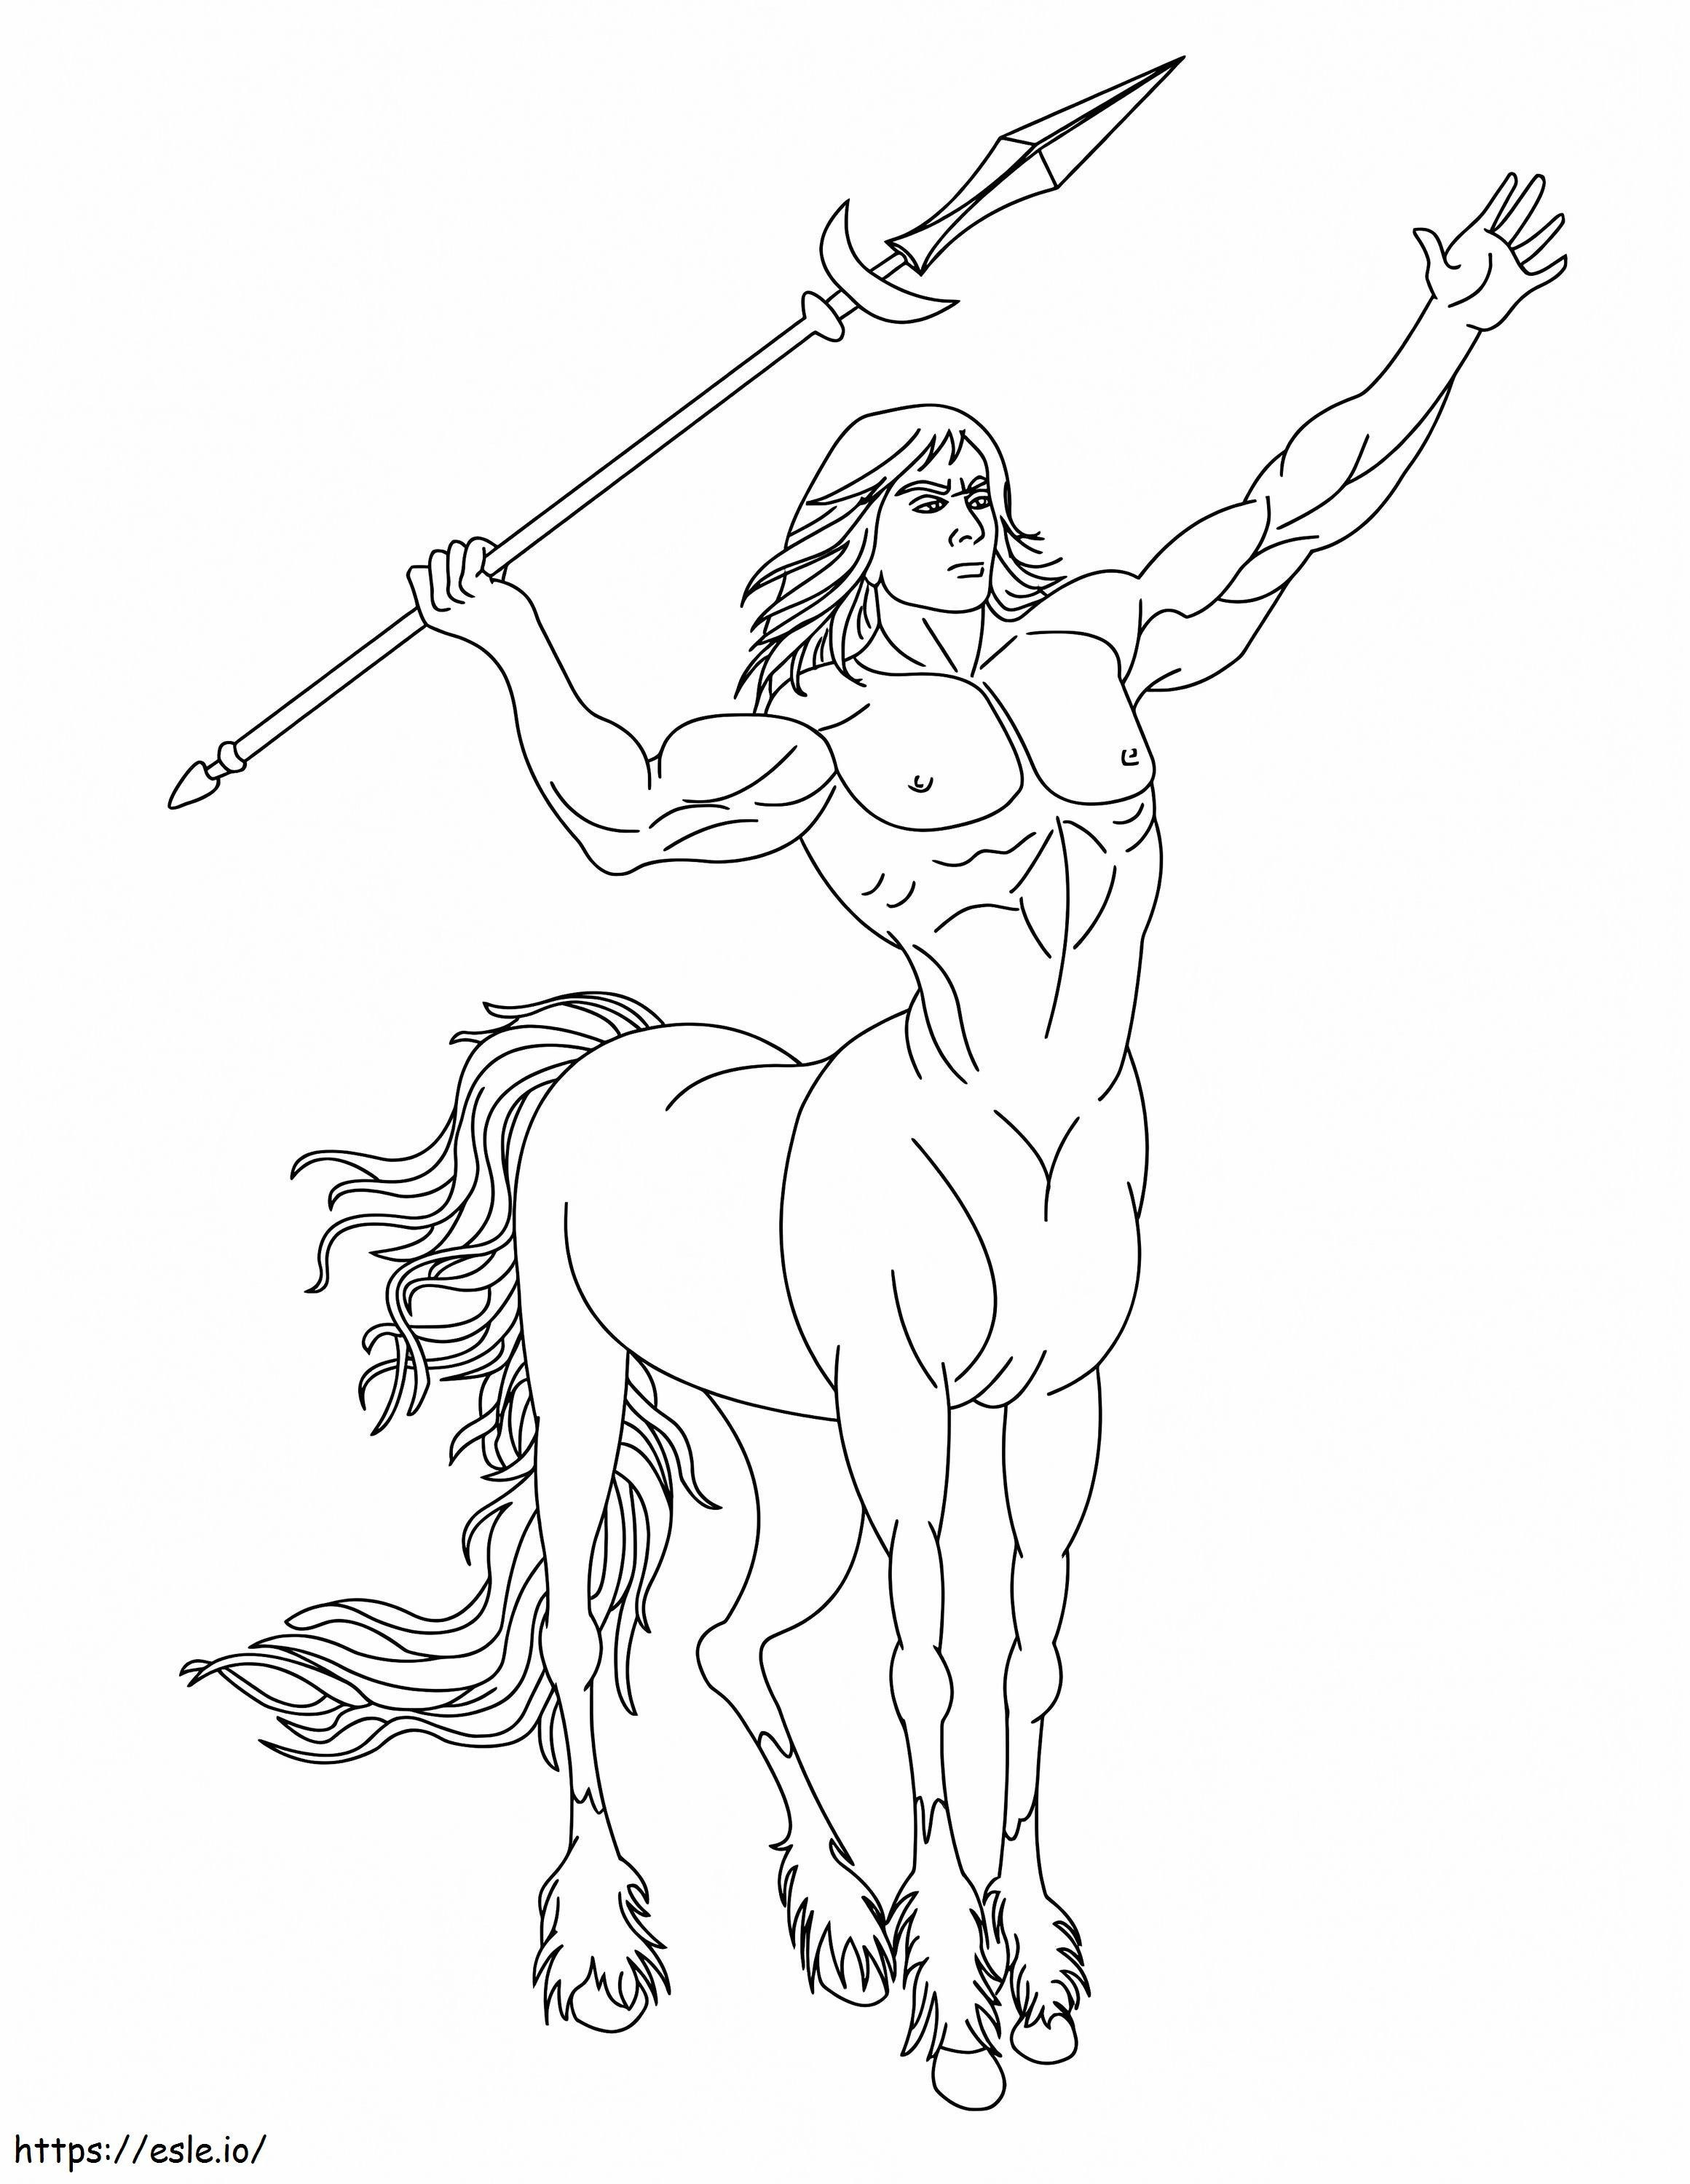 Centaur With Spear coloring page